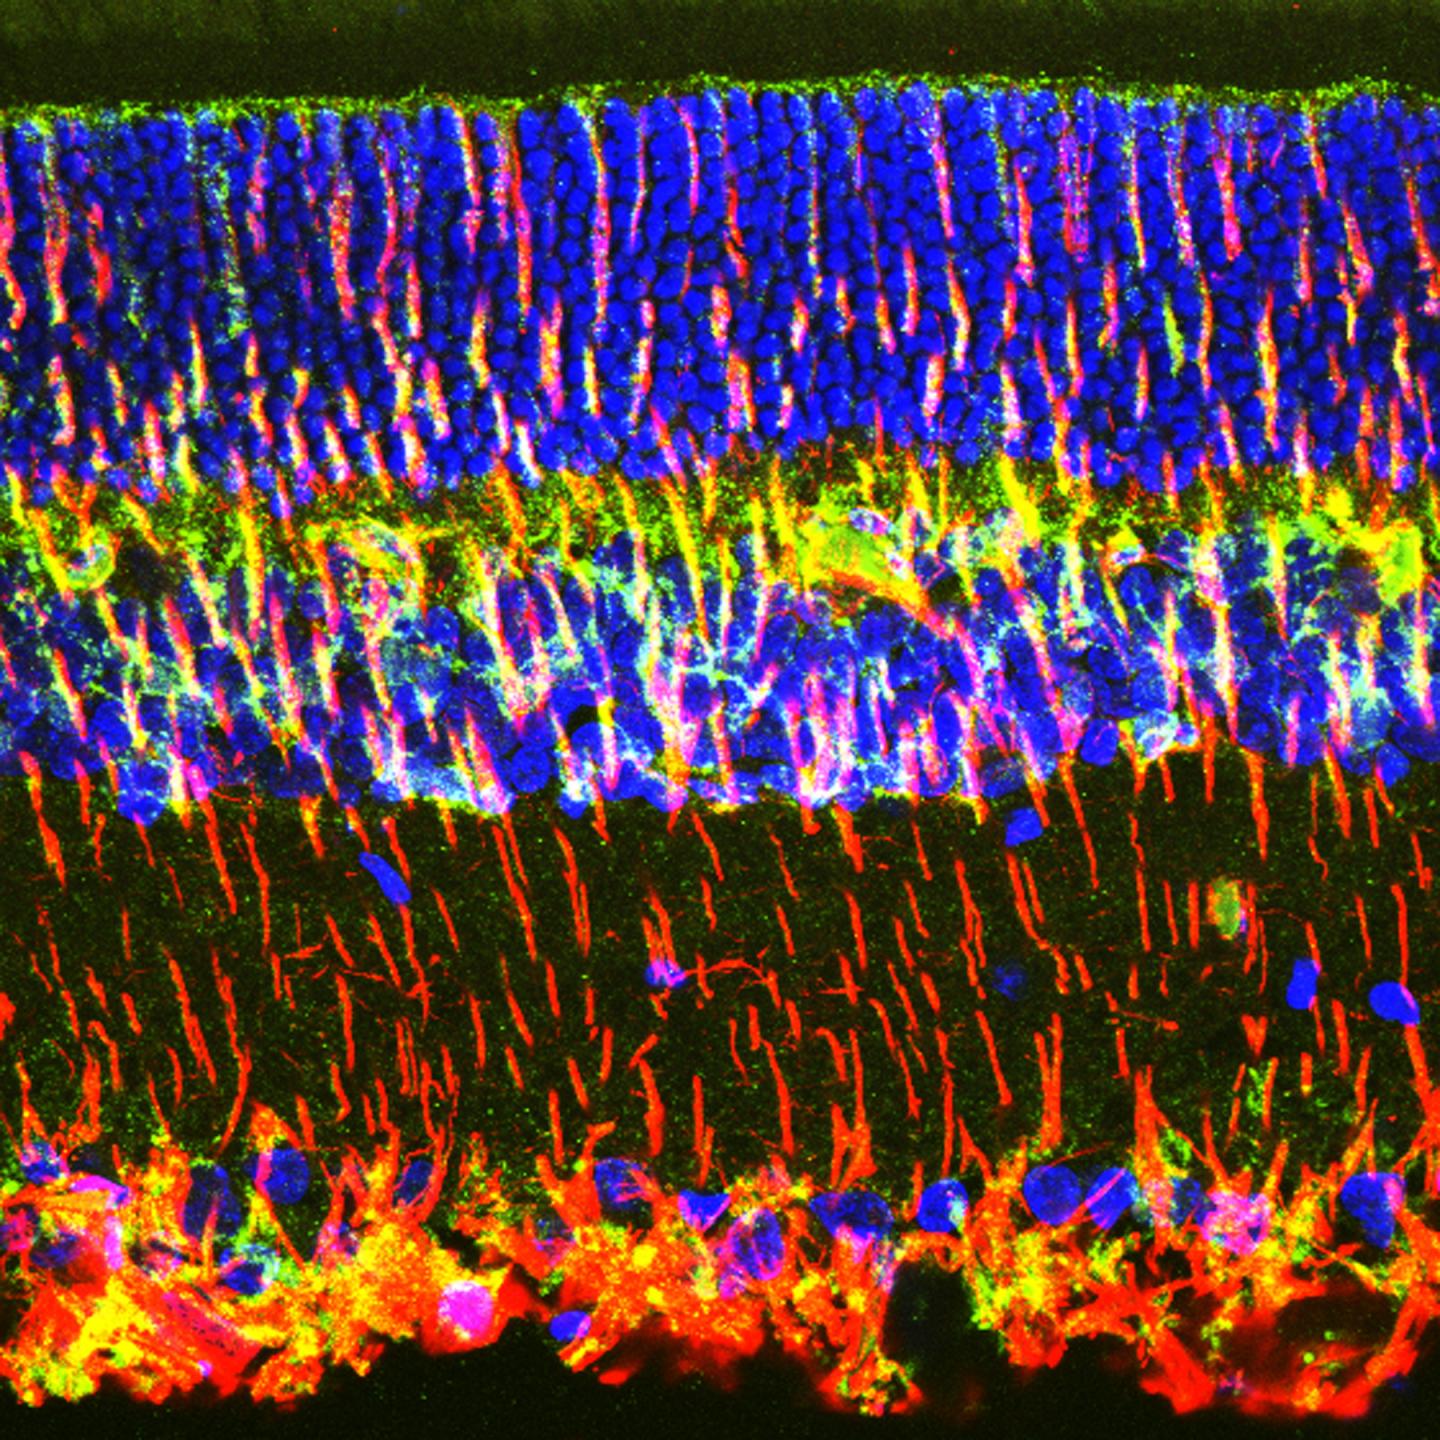 Retinal Cell Layers